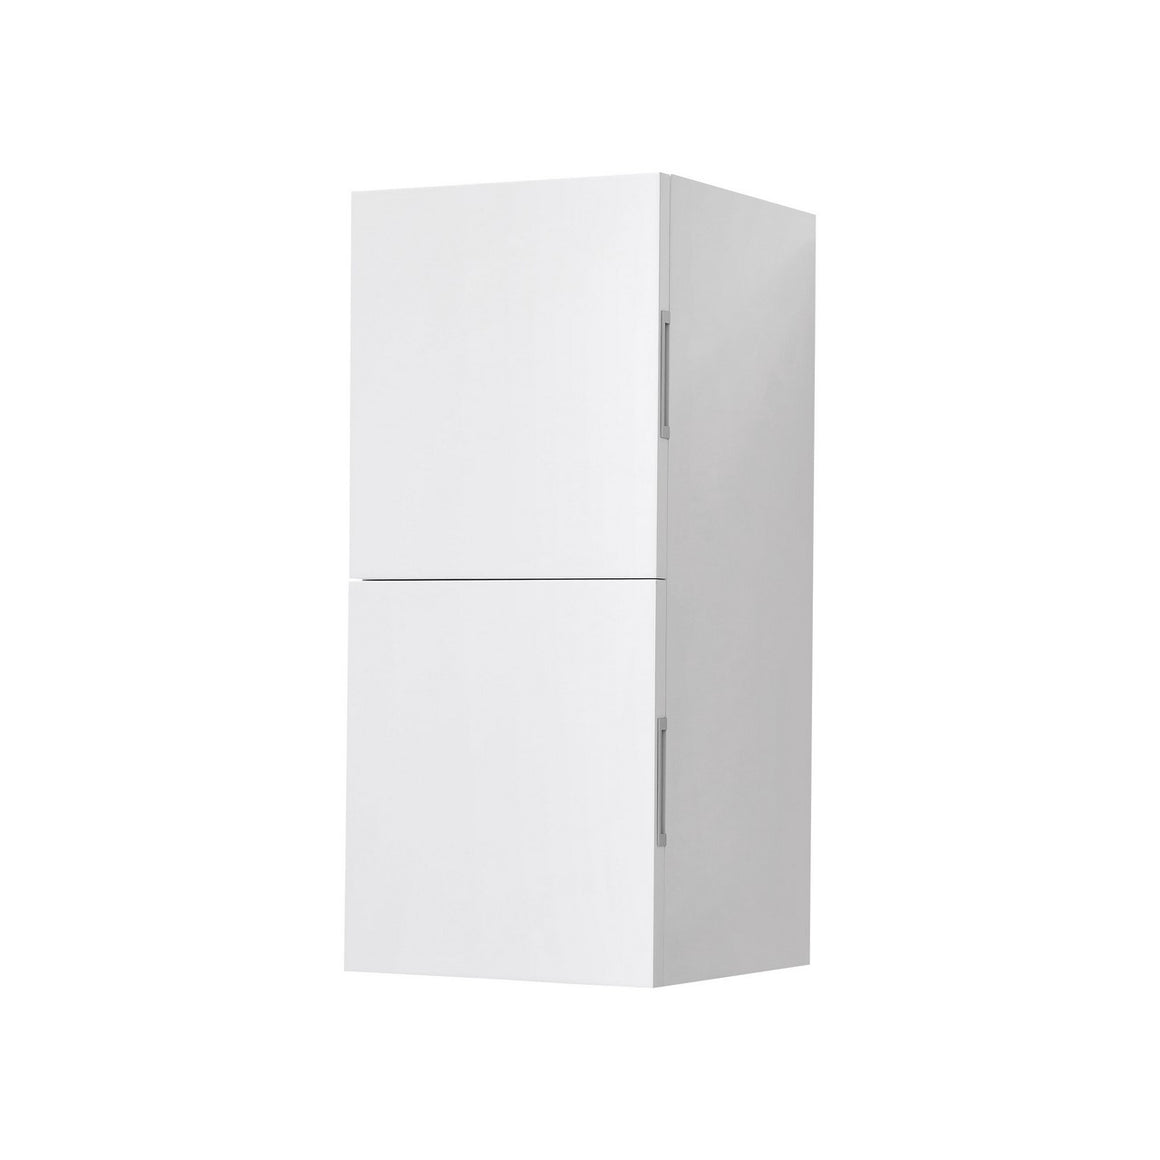 Bliss 12" Wide by 24" High Linen Side Cabinet With Two Doors in Gloss White Finish